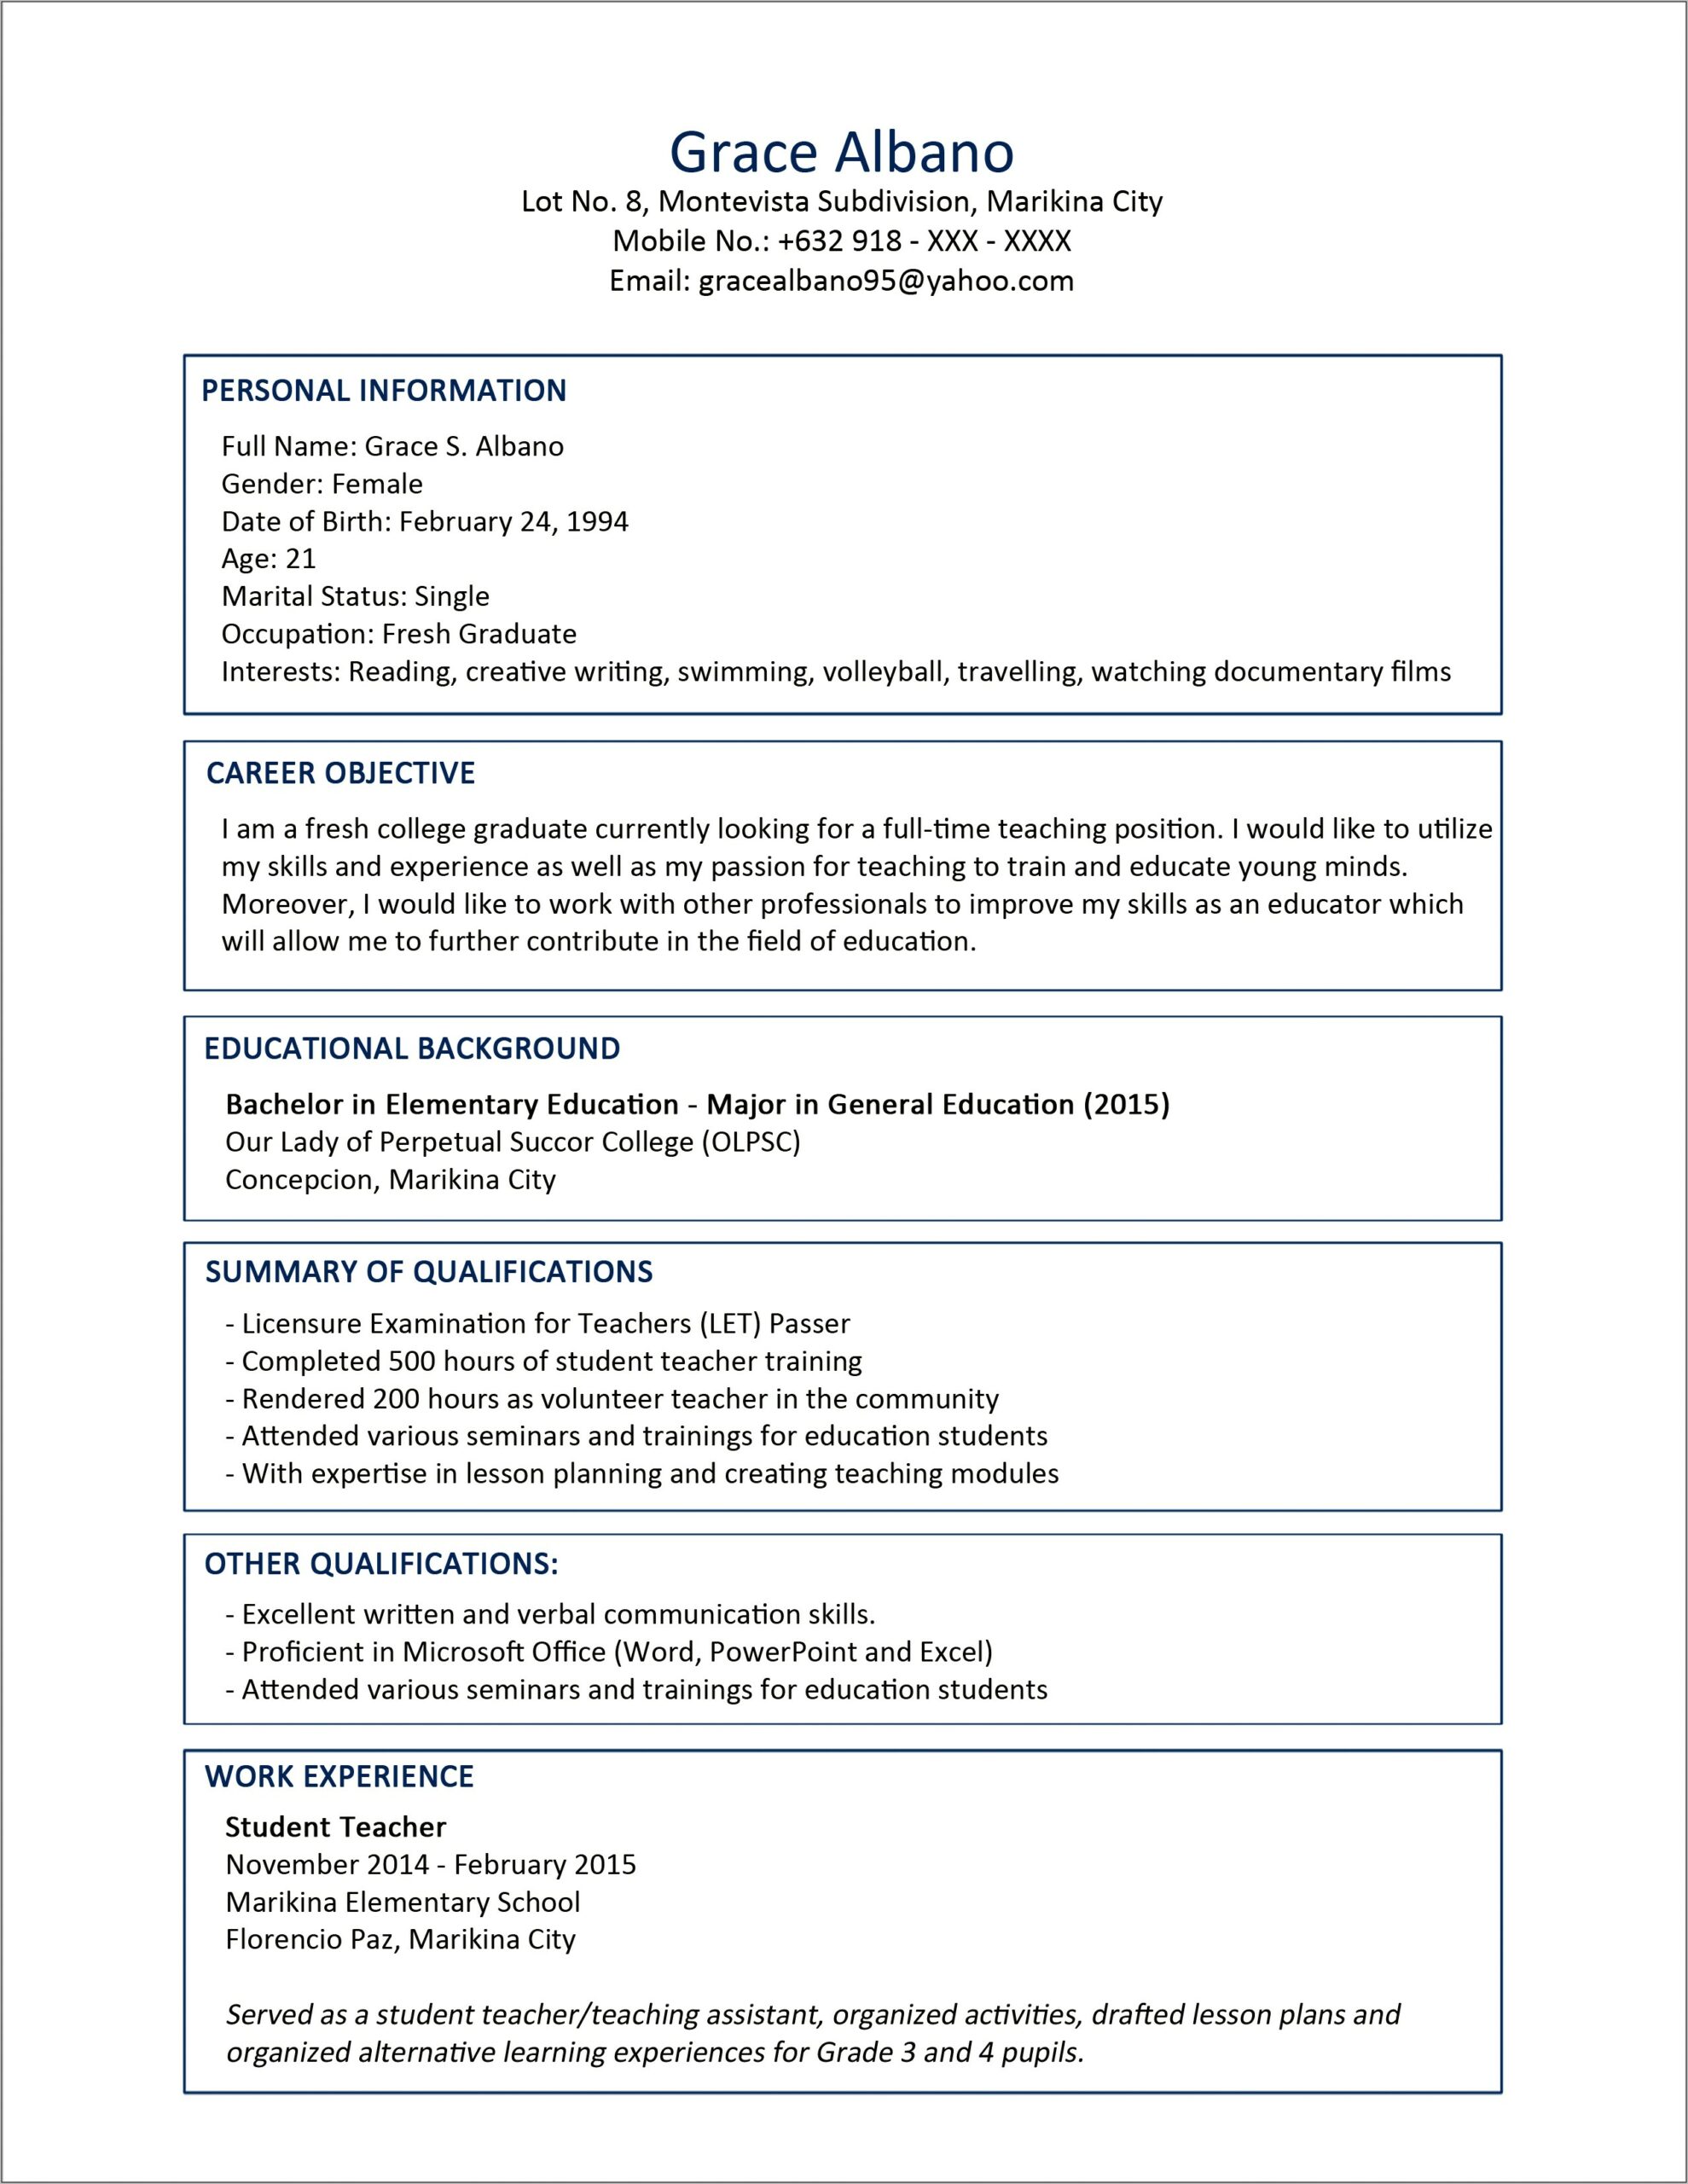 Resume Sample With Professional References